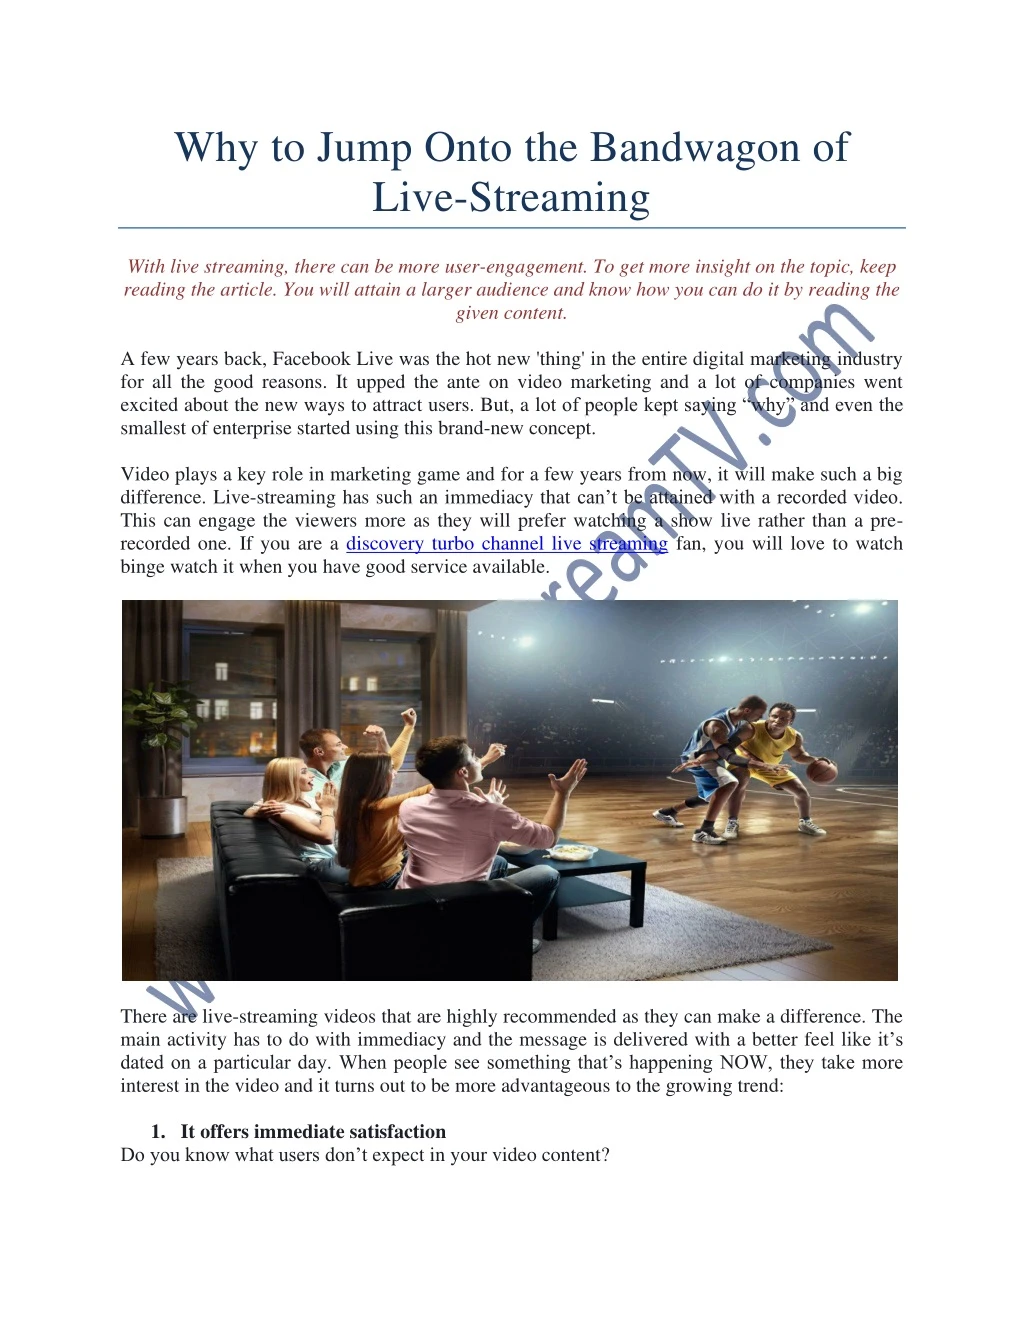 why to jump onto the bandwagon of live streaming